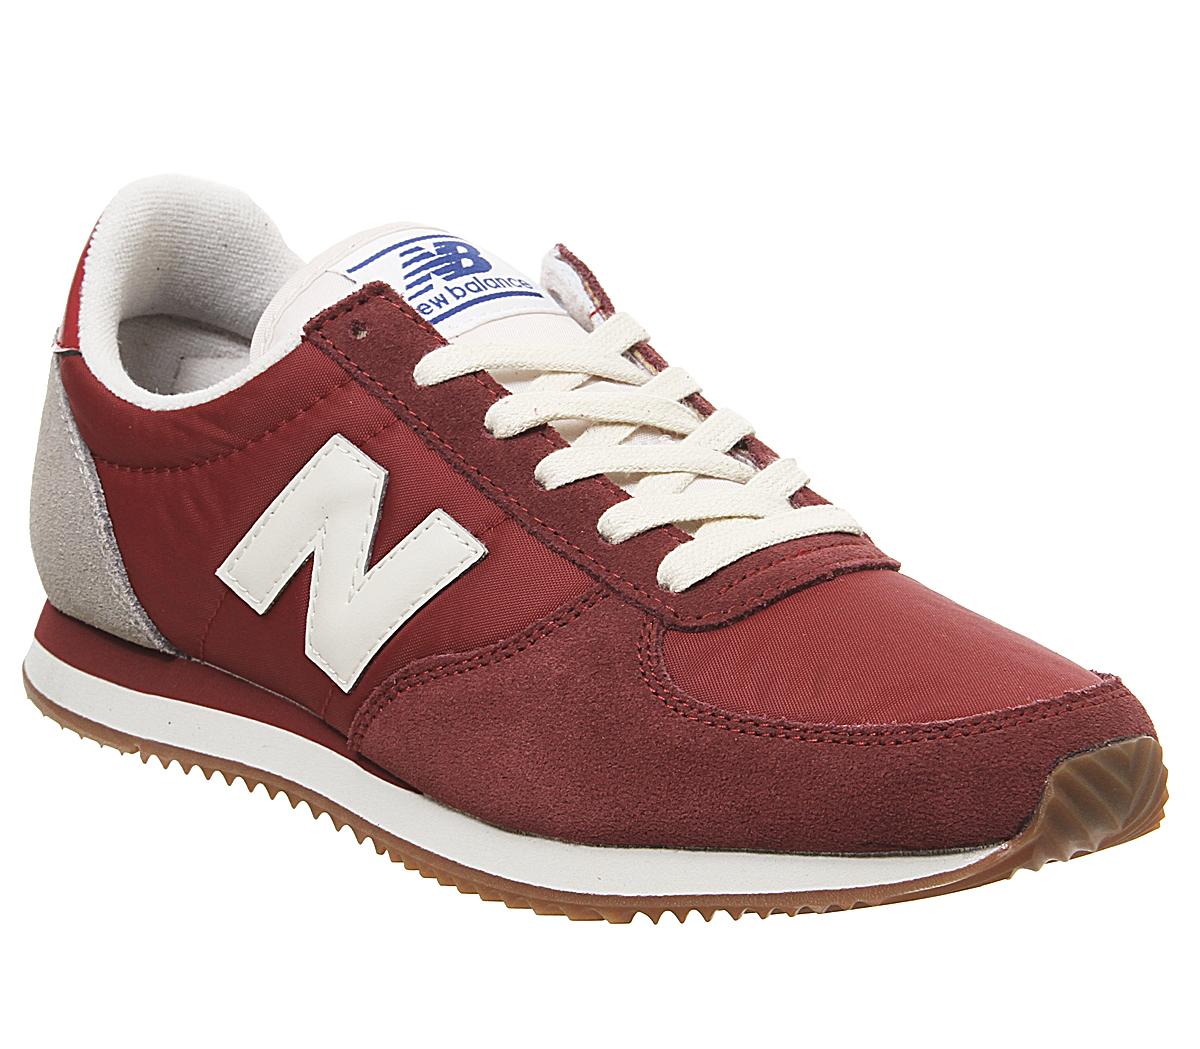 New Balance 41 Trainers Burgundy Online Shop, UP TO 53% OFF